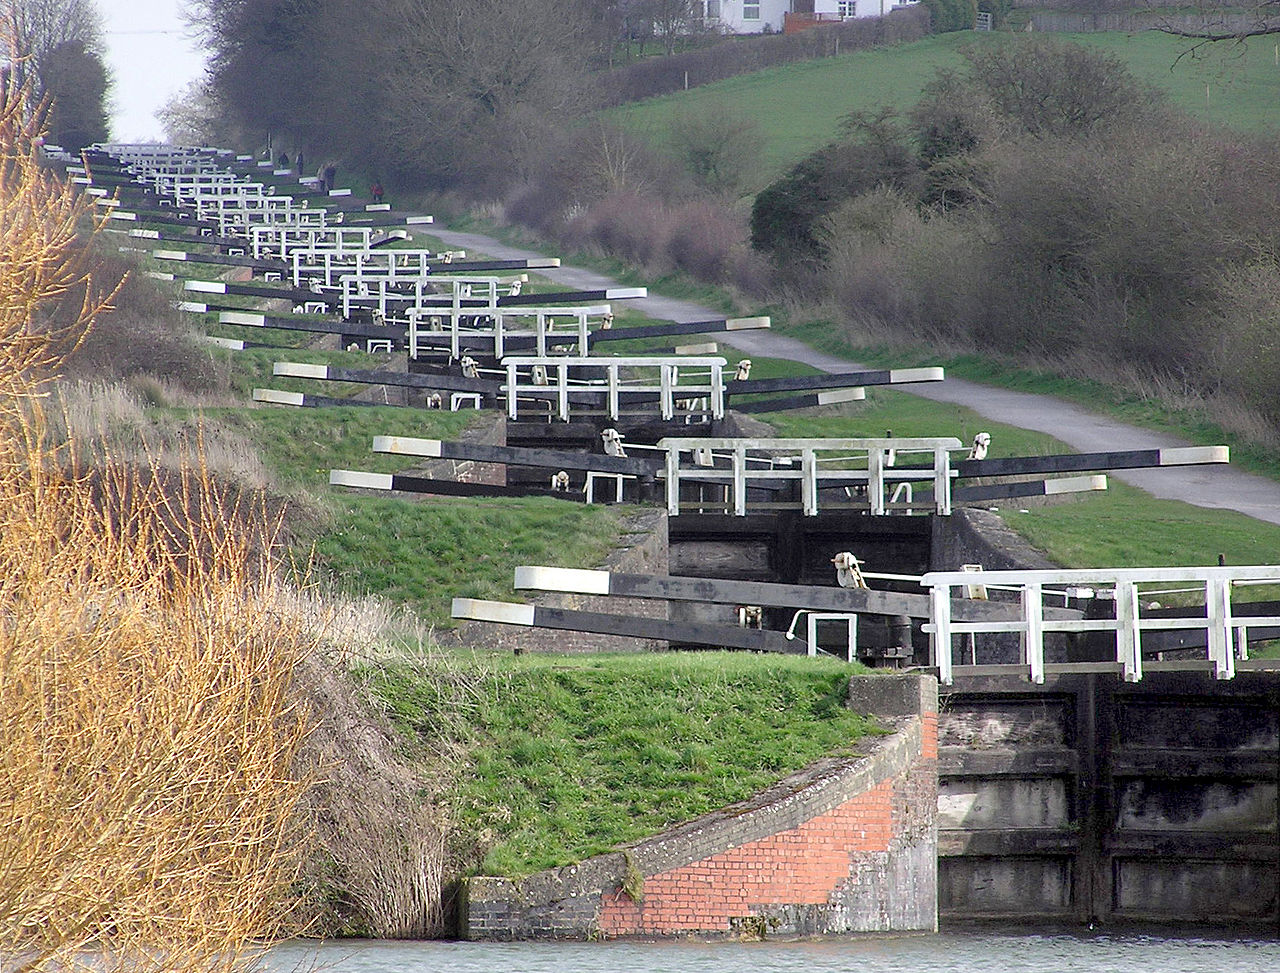 Week on the canal, pretty and minimal lockage.... - Page 1 - Boats, Planes & Trains - PistonHeads